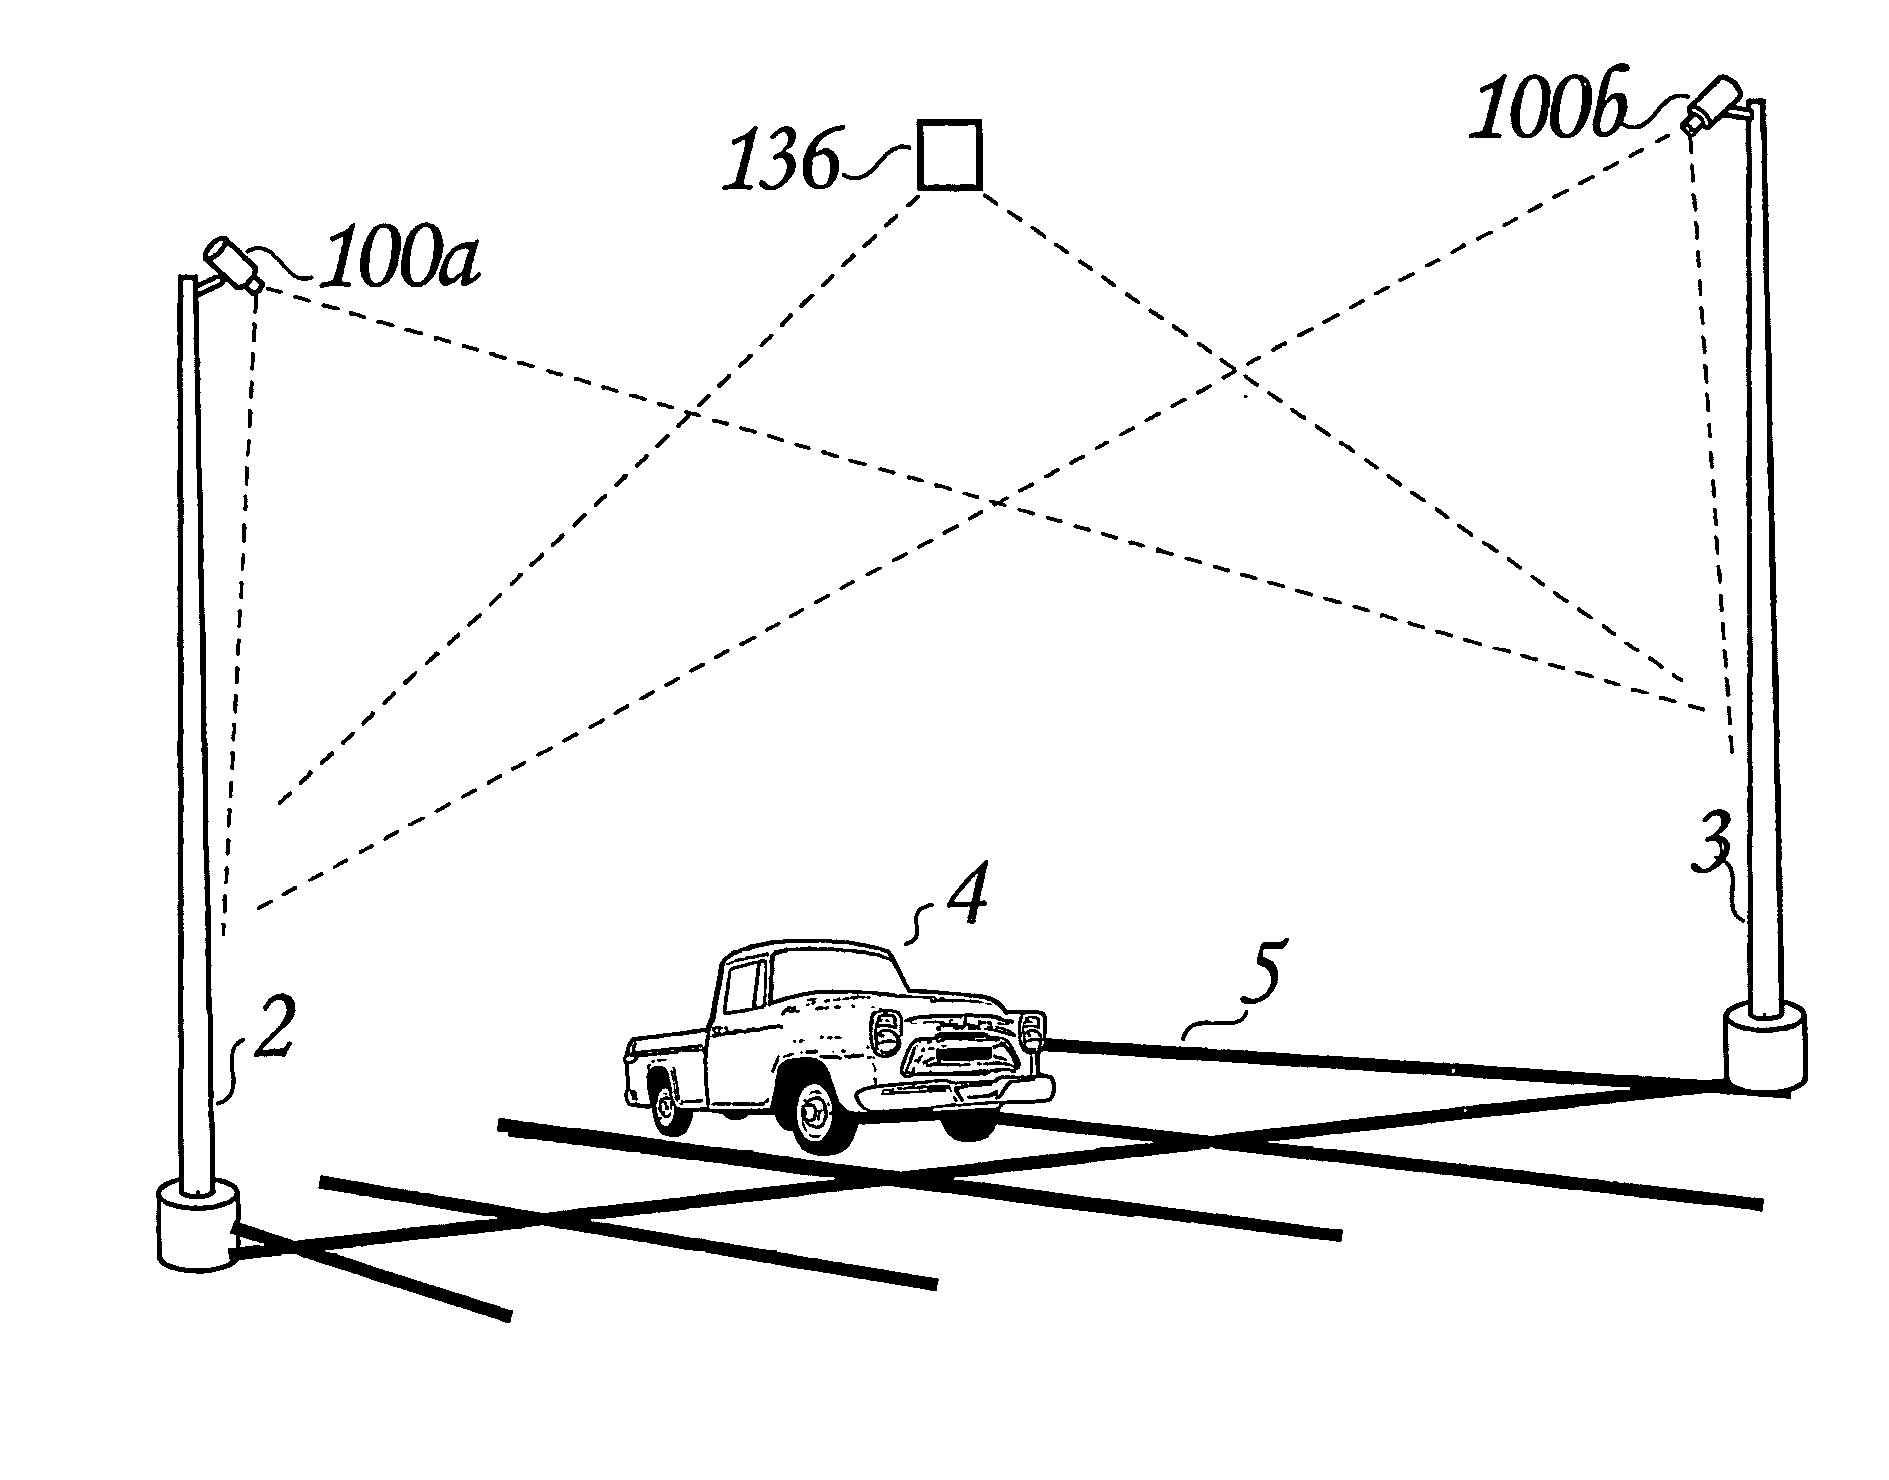 Apparatus and method for sensing the occupancy status of parking spaces in a parking lot